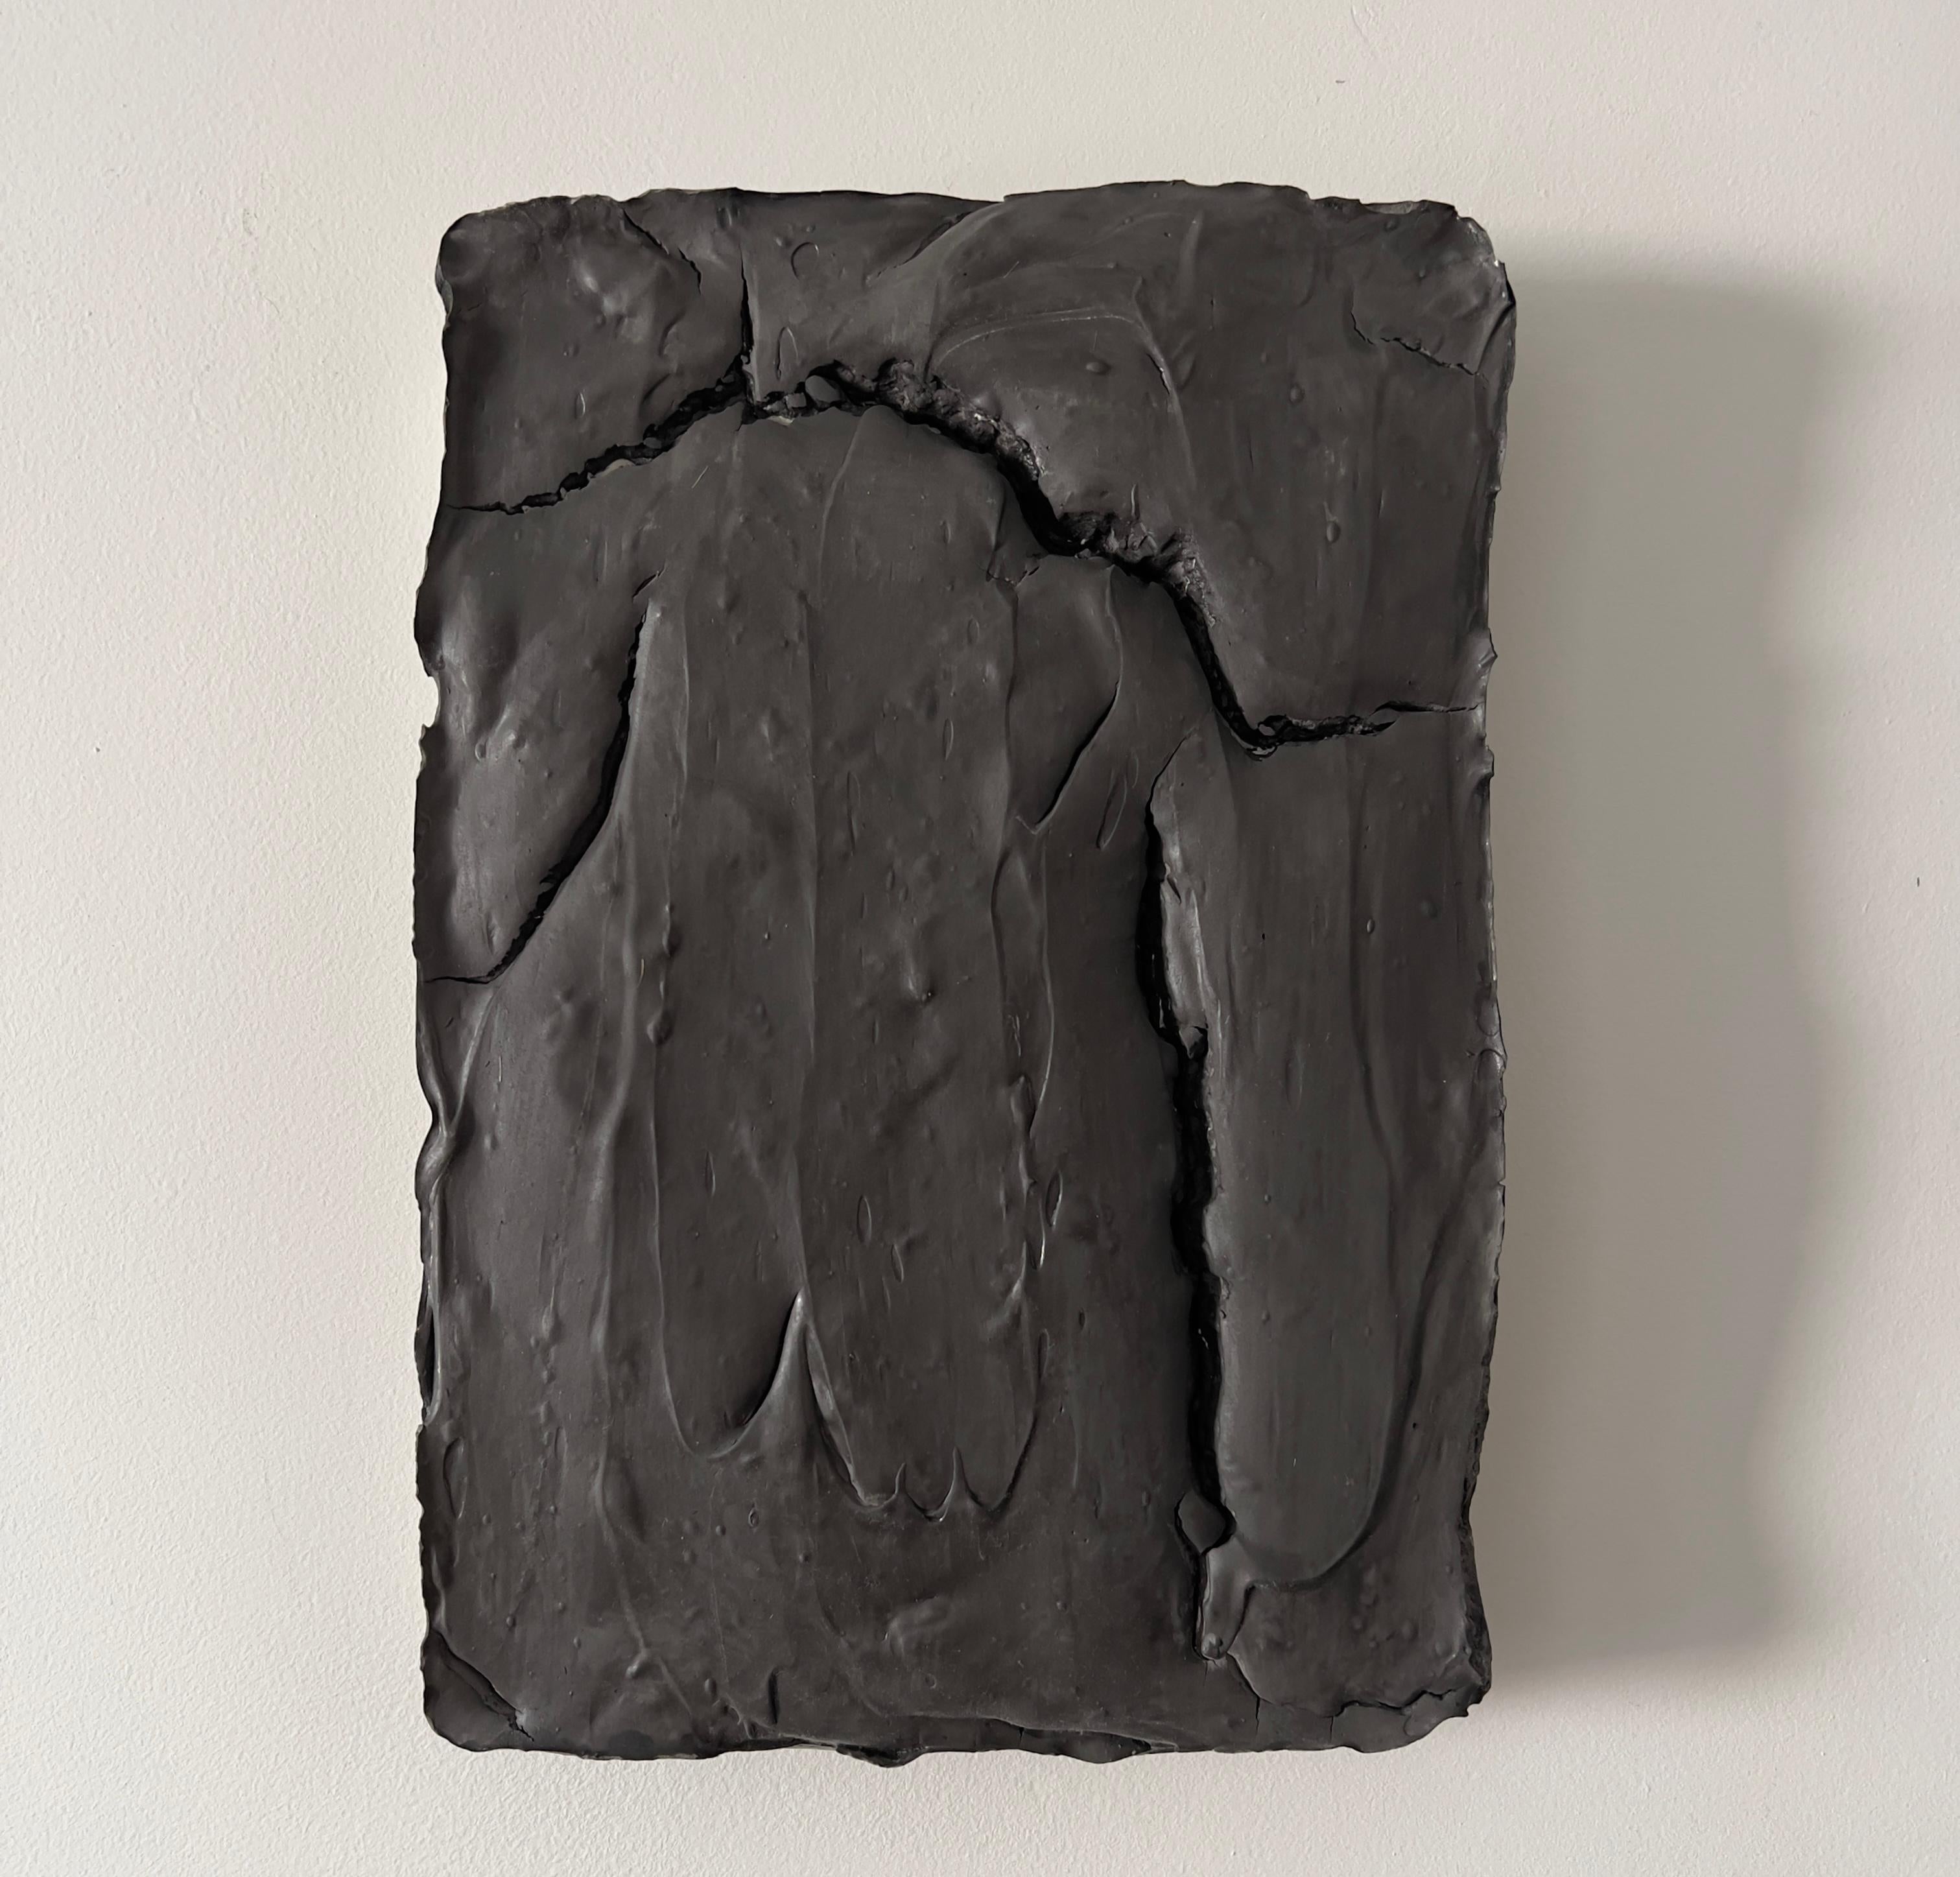 Ragisména series Black, 2021  by Rodrigo Zampol
From Ragisména Series
Plaster and ink on canvas
Dimensions: 30 cm H x 20 cm W
Weight: 3 kg
Unique piece

Signed on the back
The piece has a certificate of authenticity

Ragisména Series
The Ragisména